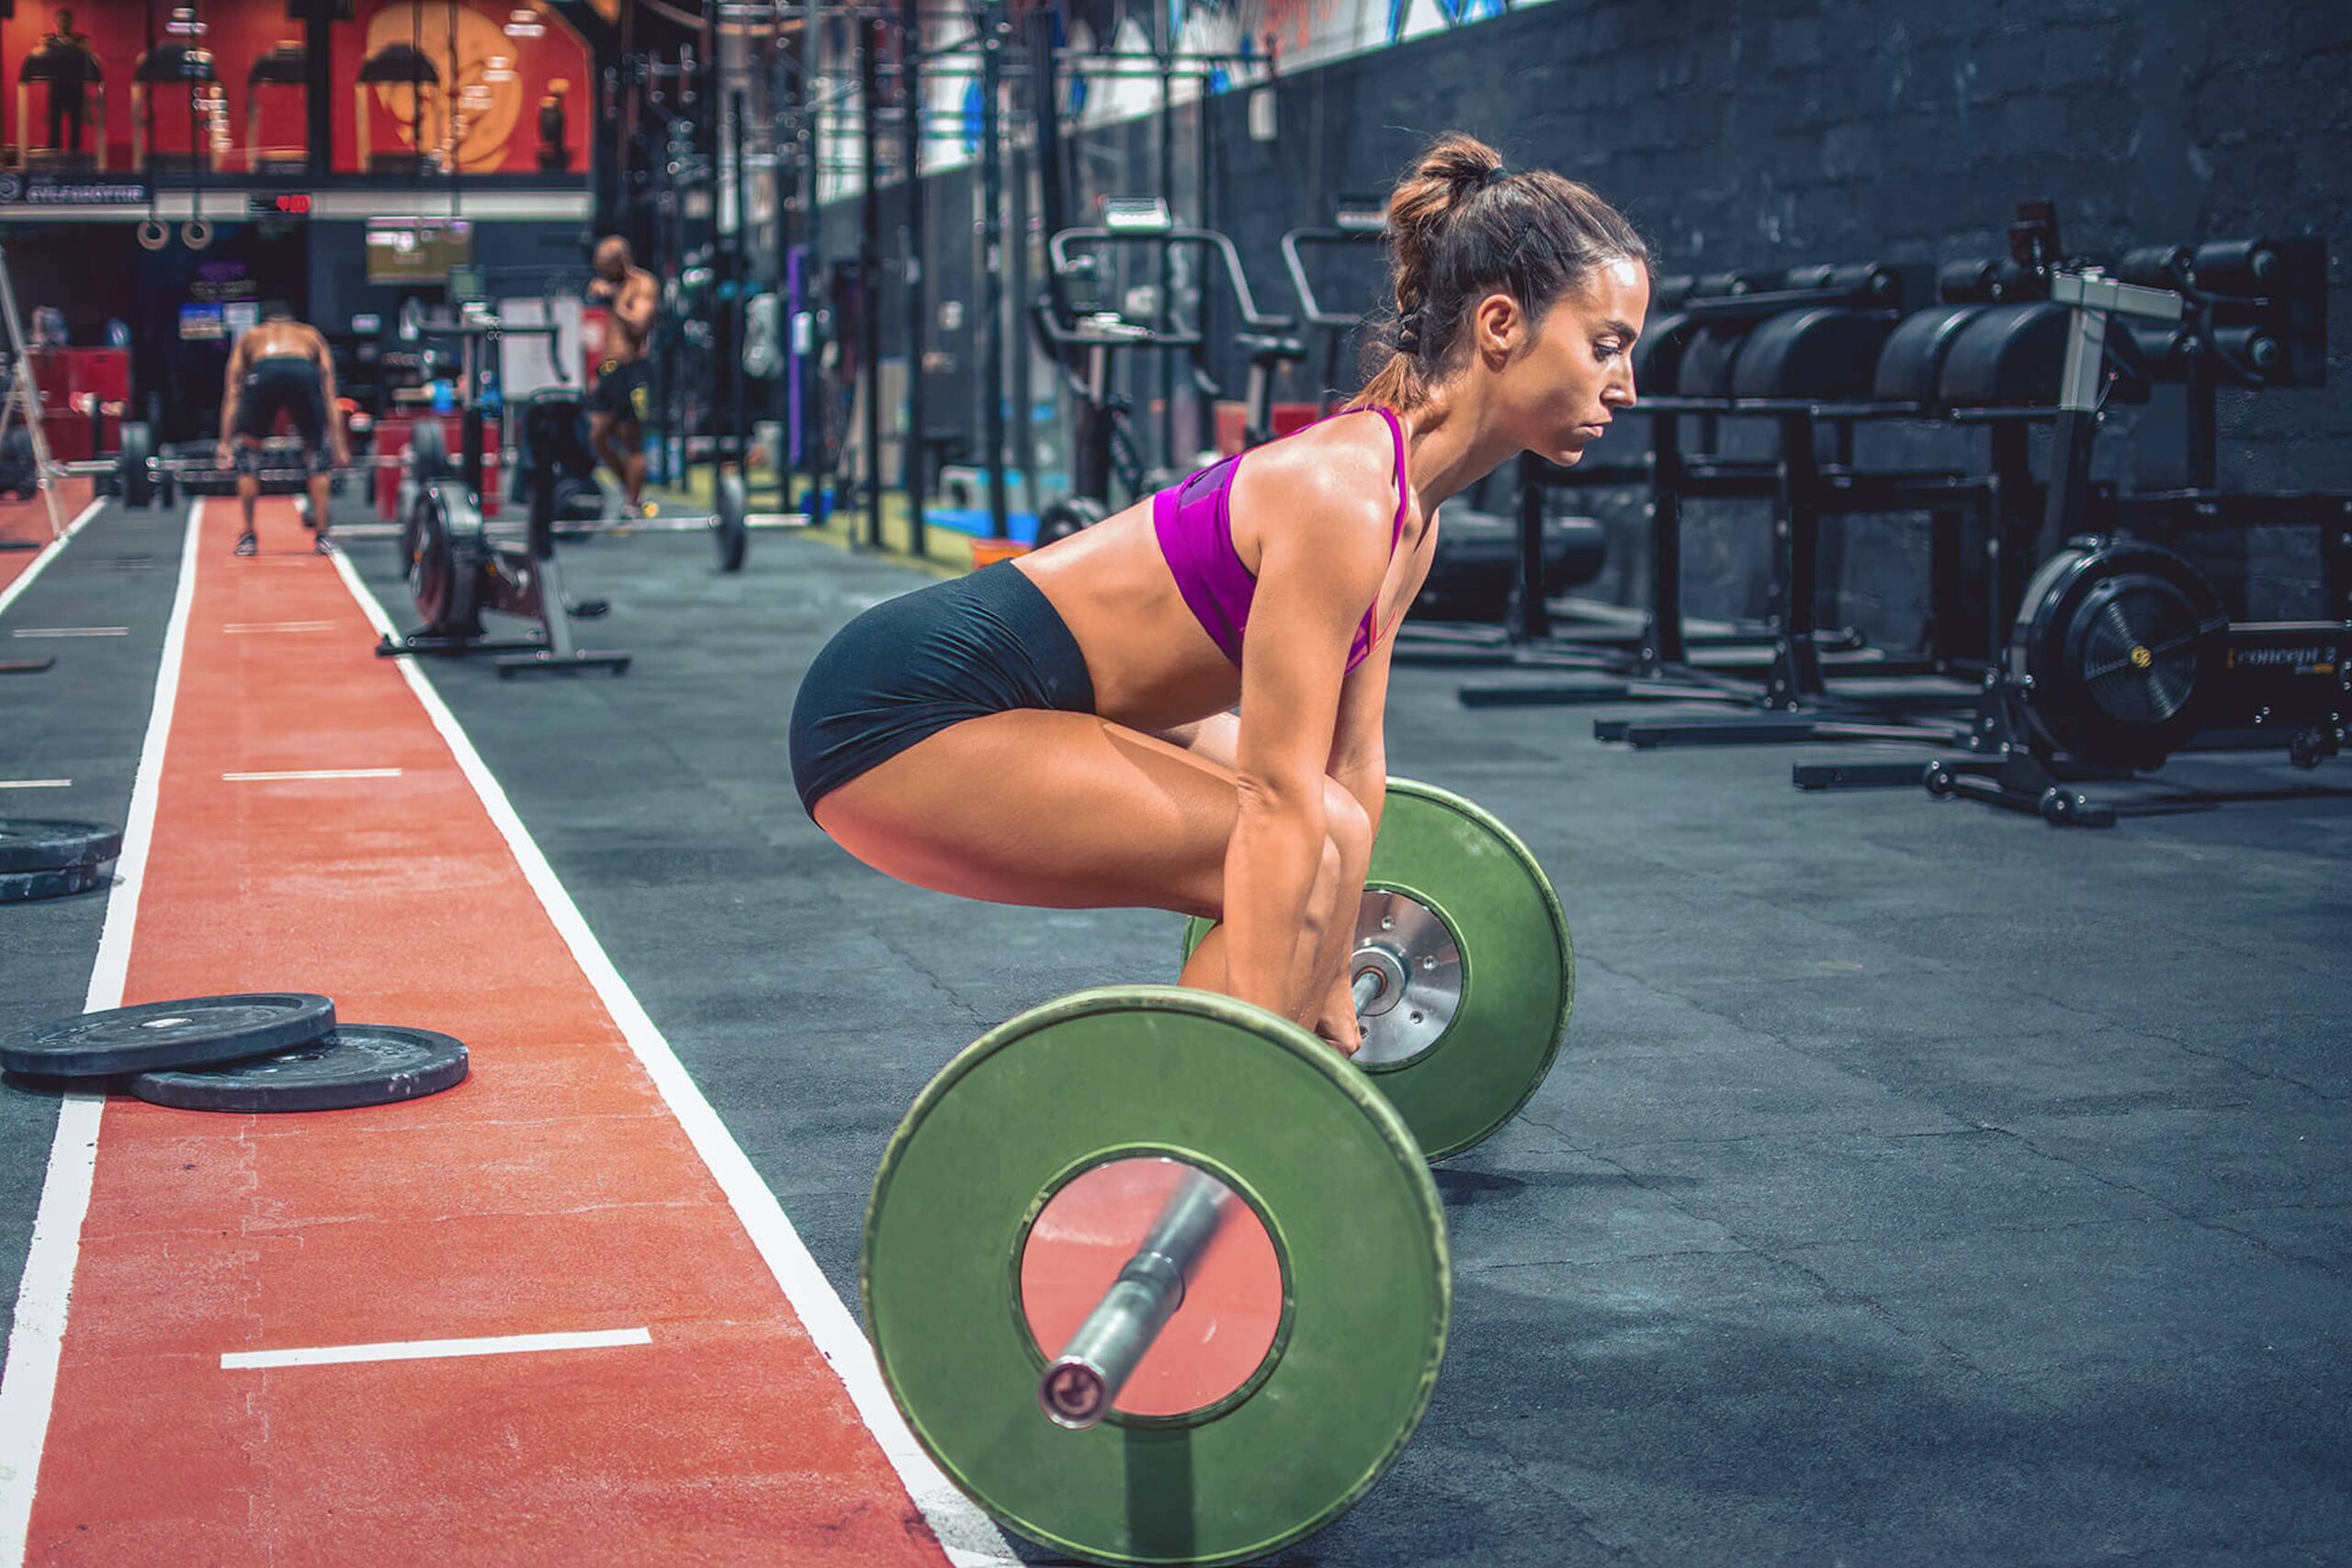 Young woman bends down to lift heavy weights. Don't let a shoulder dislocation or other injury stop you from the activities you love, from weight lifting, to playing ball, or anything in between.